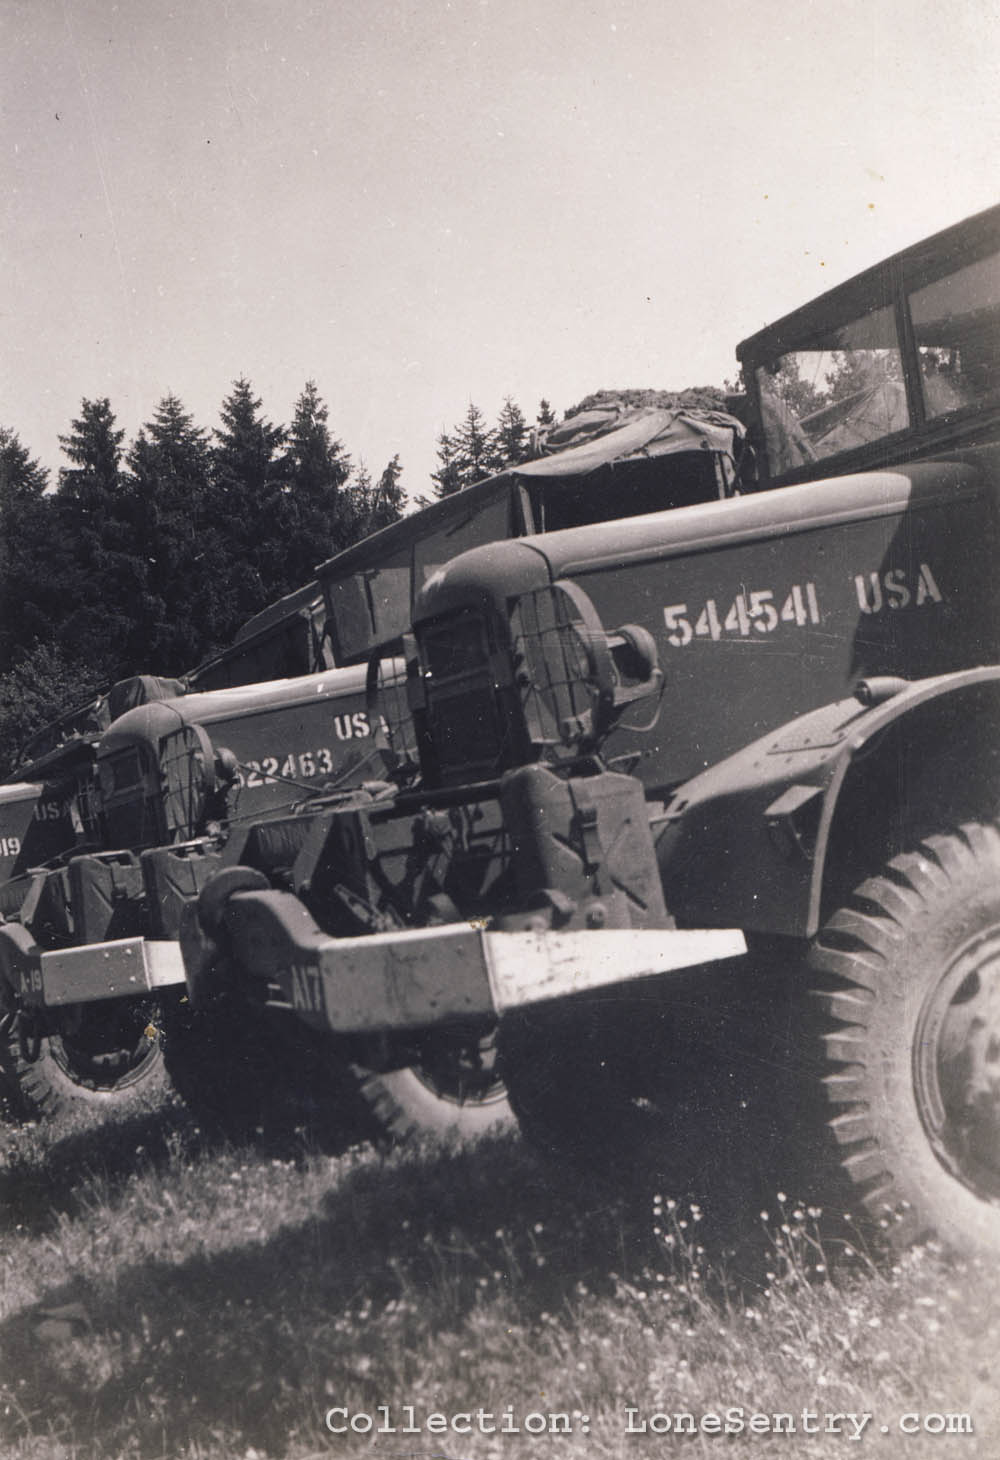 Truck displaying a complete set of markings for the 995th Field Artillery Battalion. (Collection LoneSentry.com)